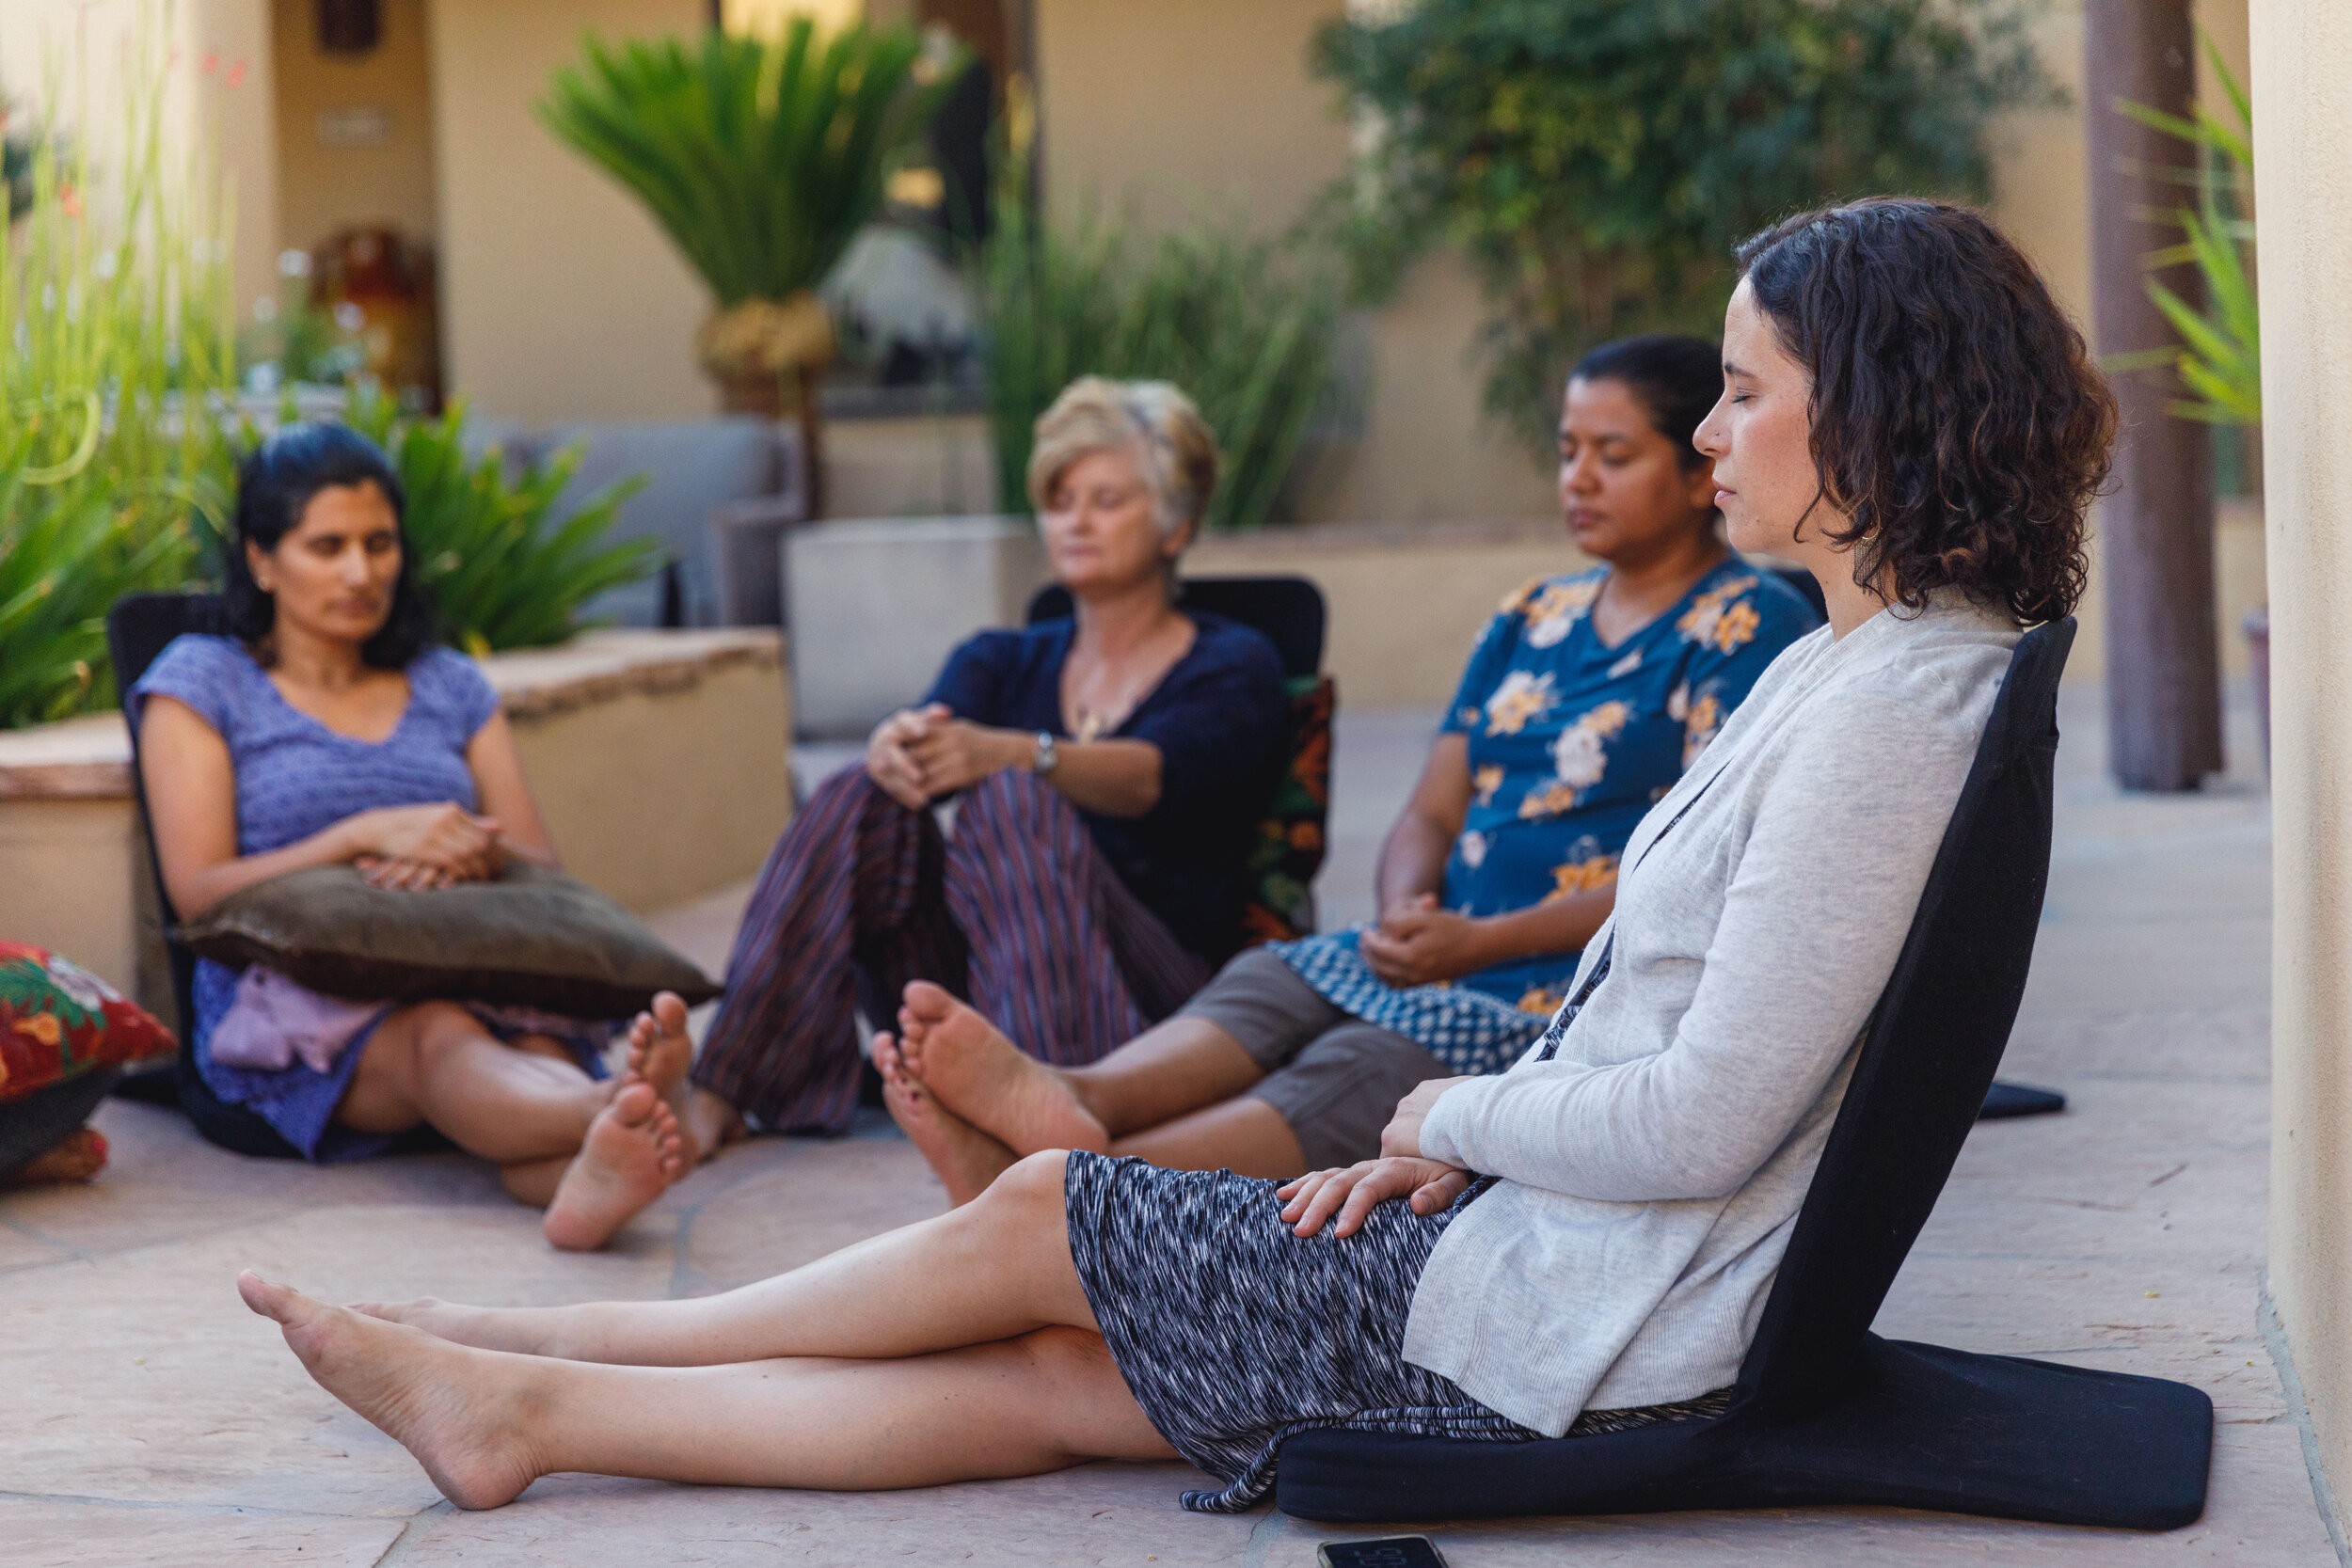 Dr. Jill Wener leads a guided meditation with retreat attendees outside at the retreat center, seated in comfortable floor chairs. 